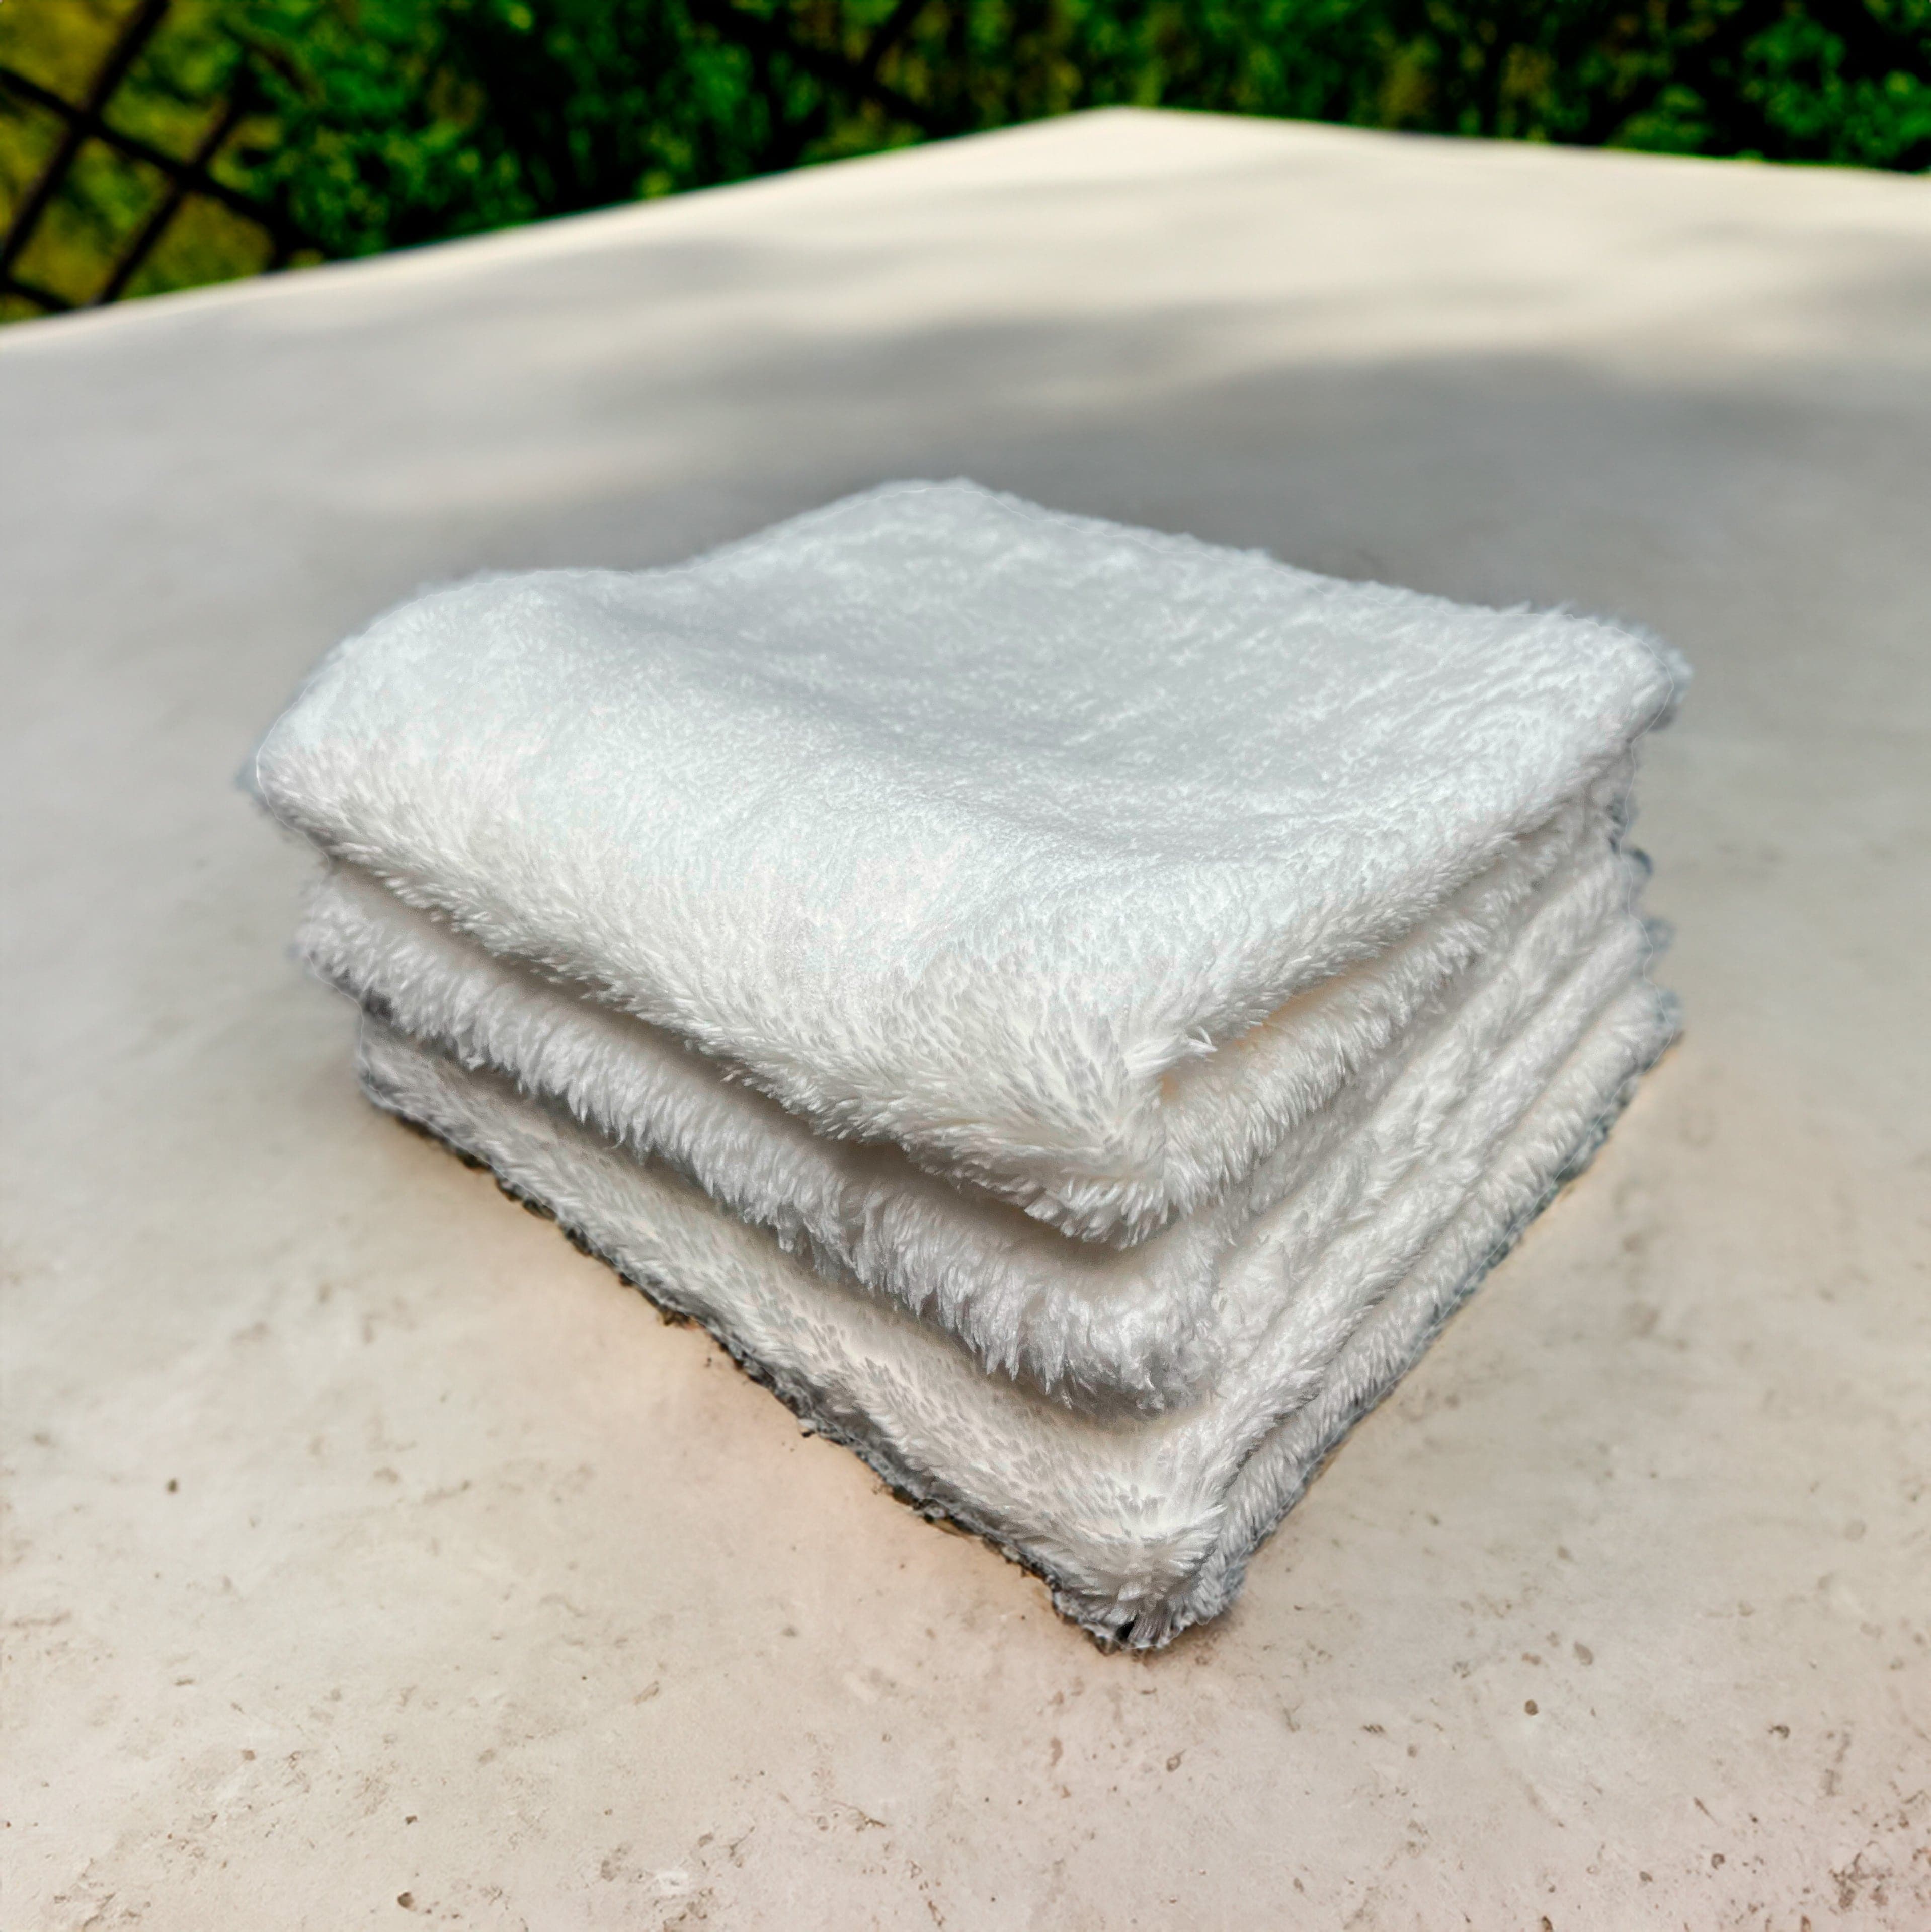 coralfleece.jpg - Economy Coral Fleece White Towel 3 Pack - Undrdog Surface Products